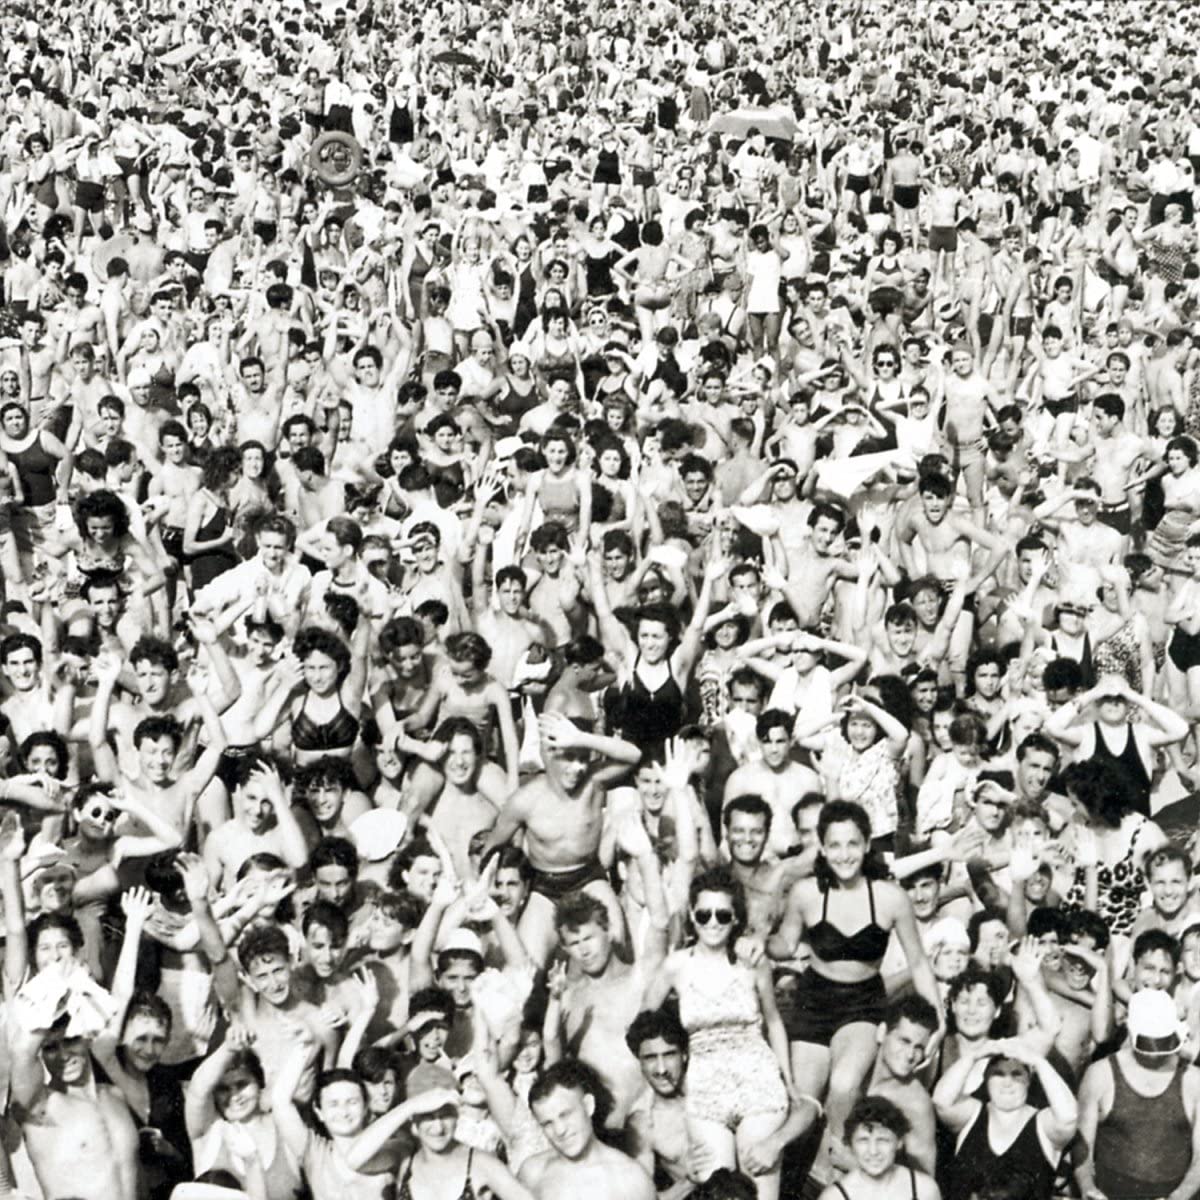 George Michael's  ground-breaking album Listen Without Prejudice vol.1 has been remastered and features the iconic artwork from the original vinyl.